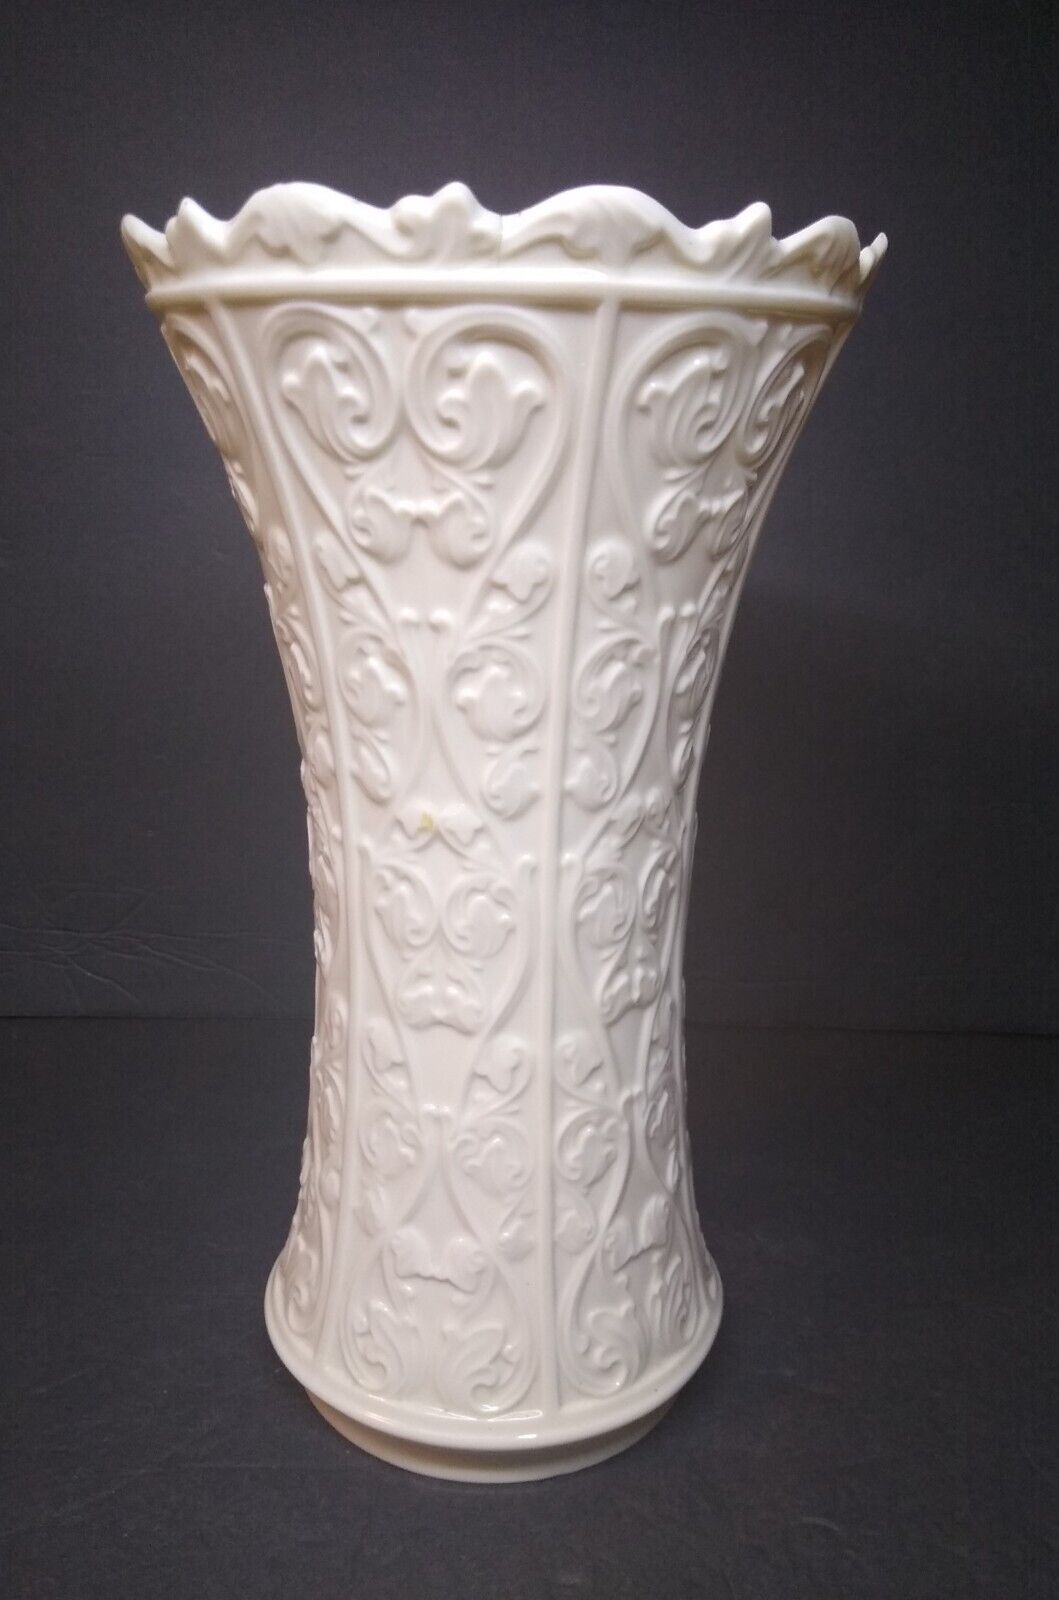 lenox flared embossed textured ivory white vase made in usa